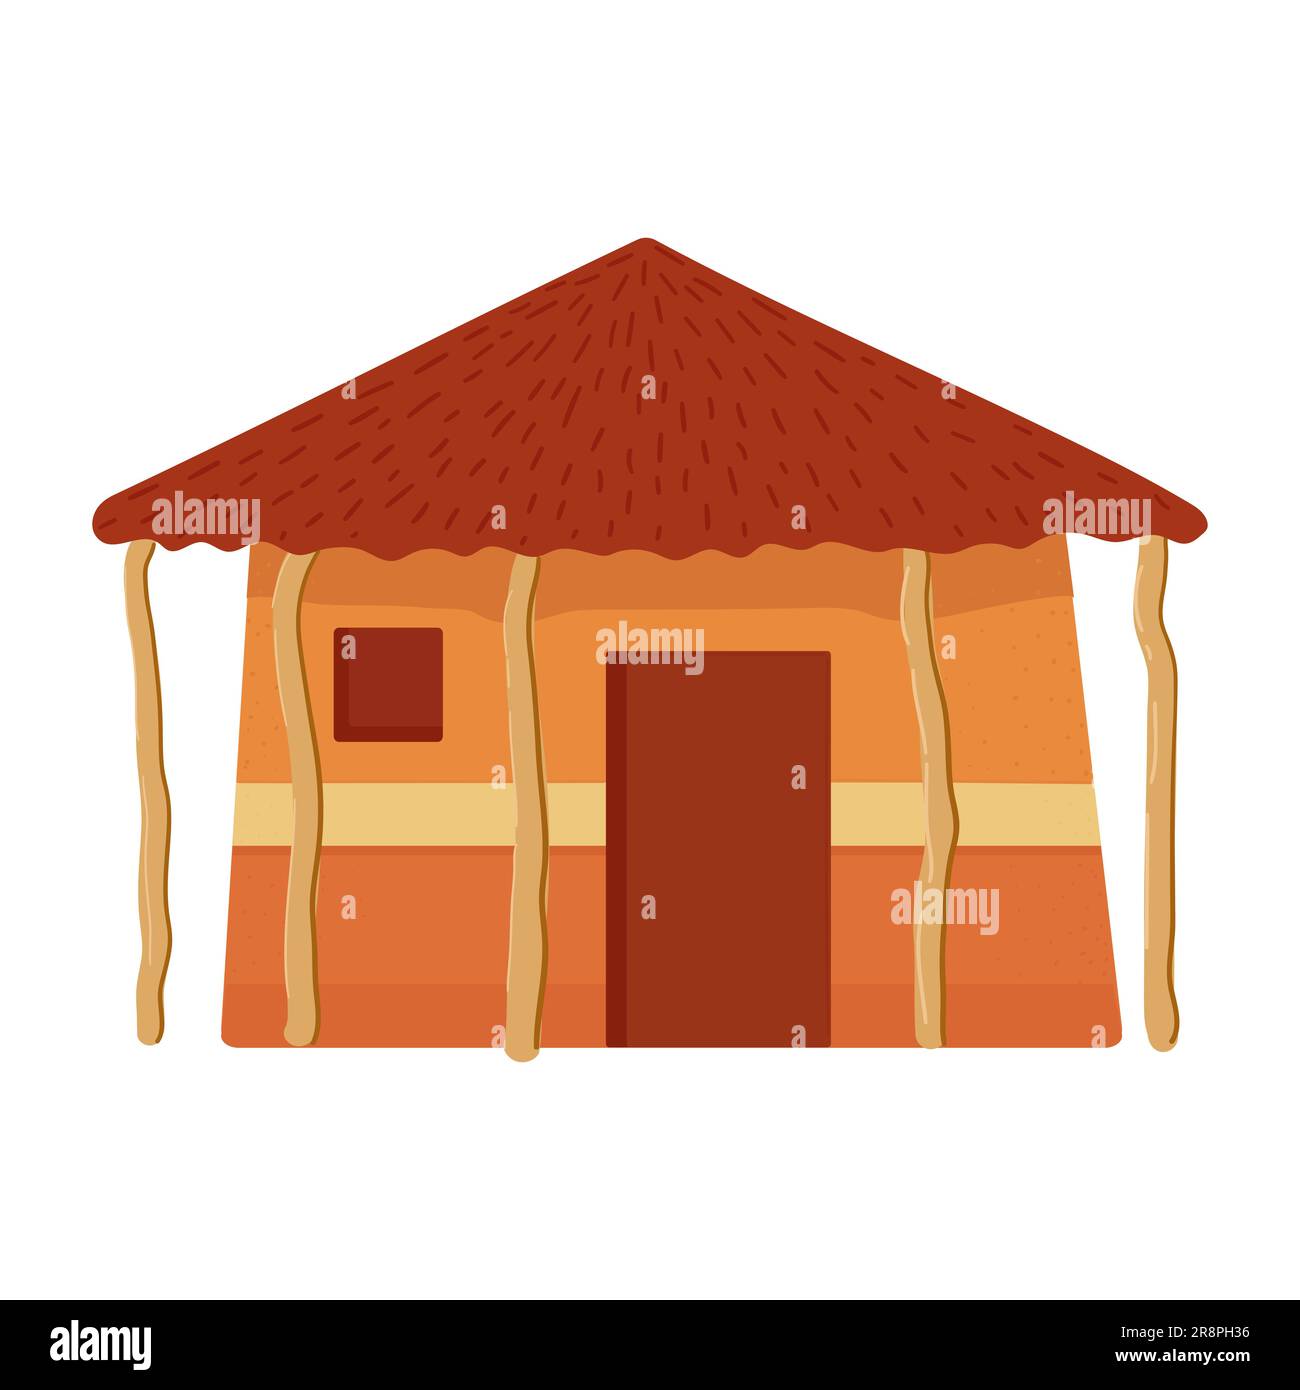 Bungalow with thatched roof. National hut or traditional home of inhabitants African tribes. Vector illustration in flat style. Isolated building on w Stock Vector